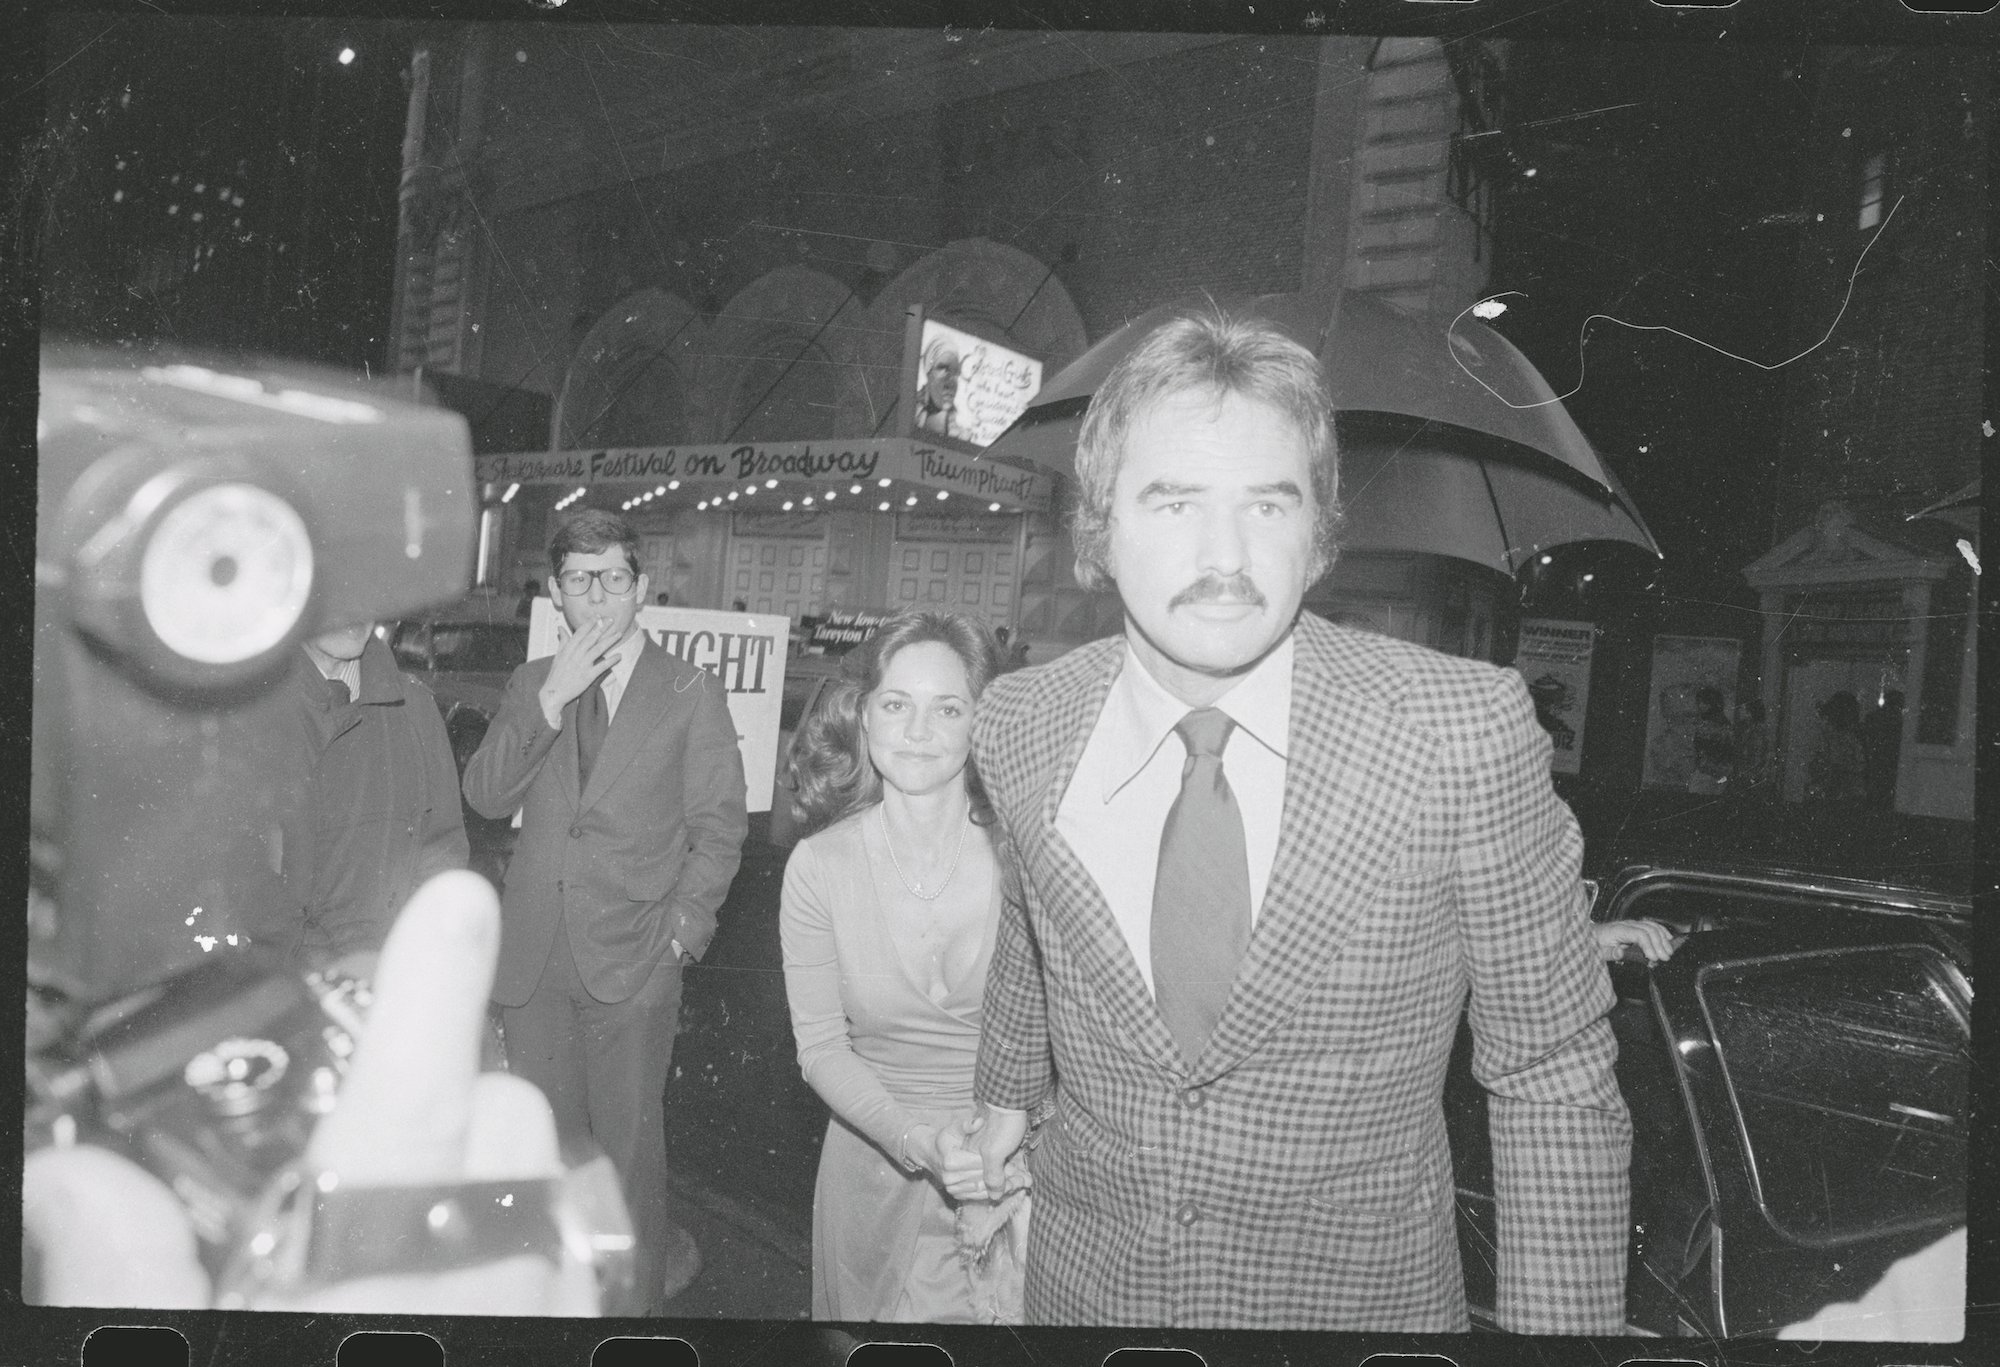 Sally Field and Burt Reynolds walking into a performance of 'Side by Side' in NYC in 1977